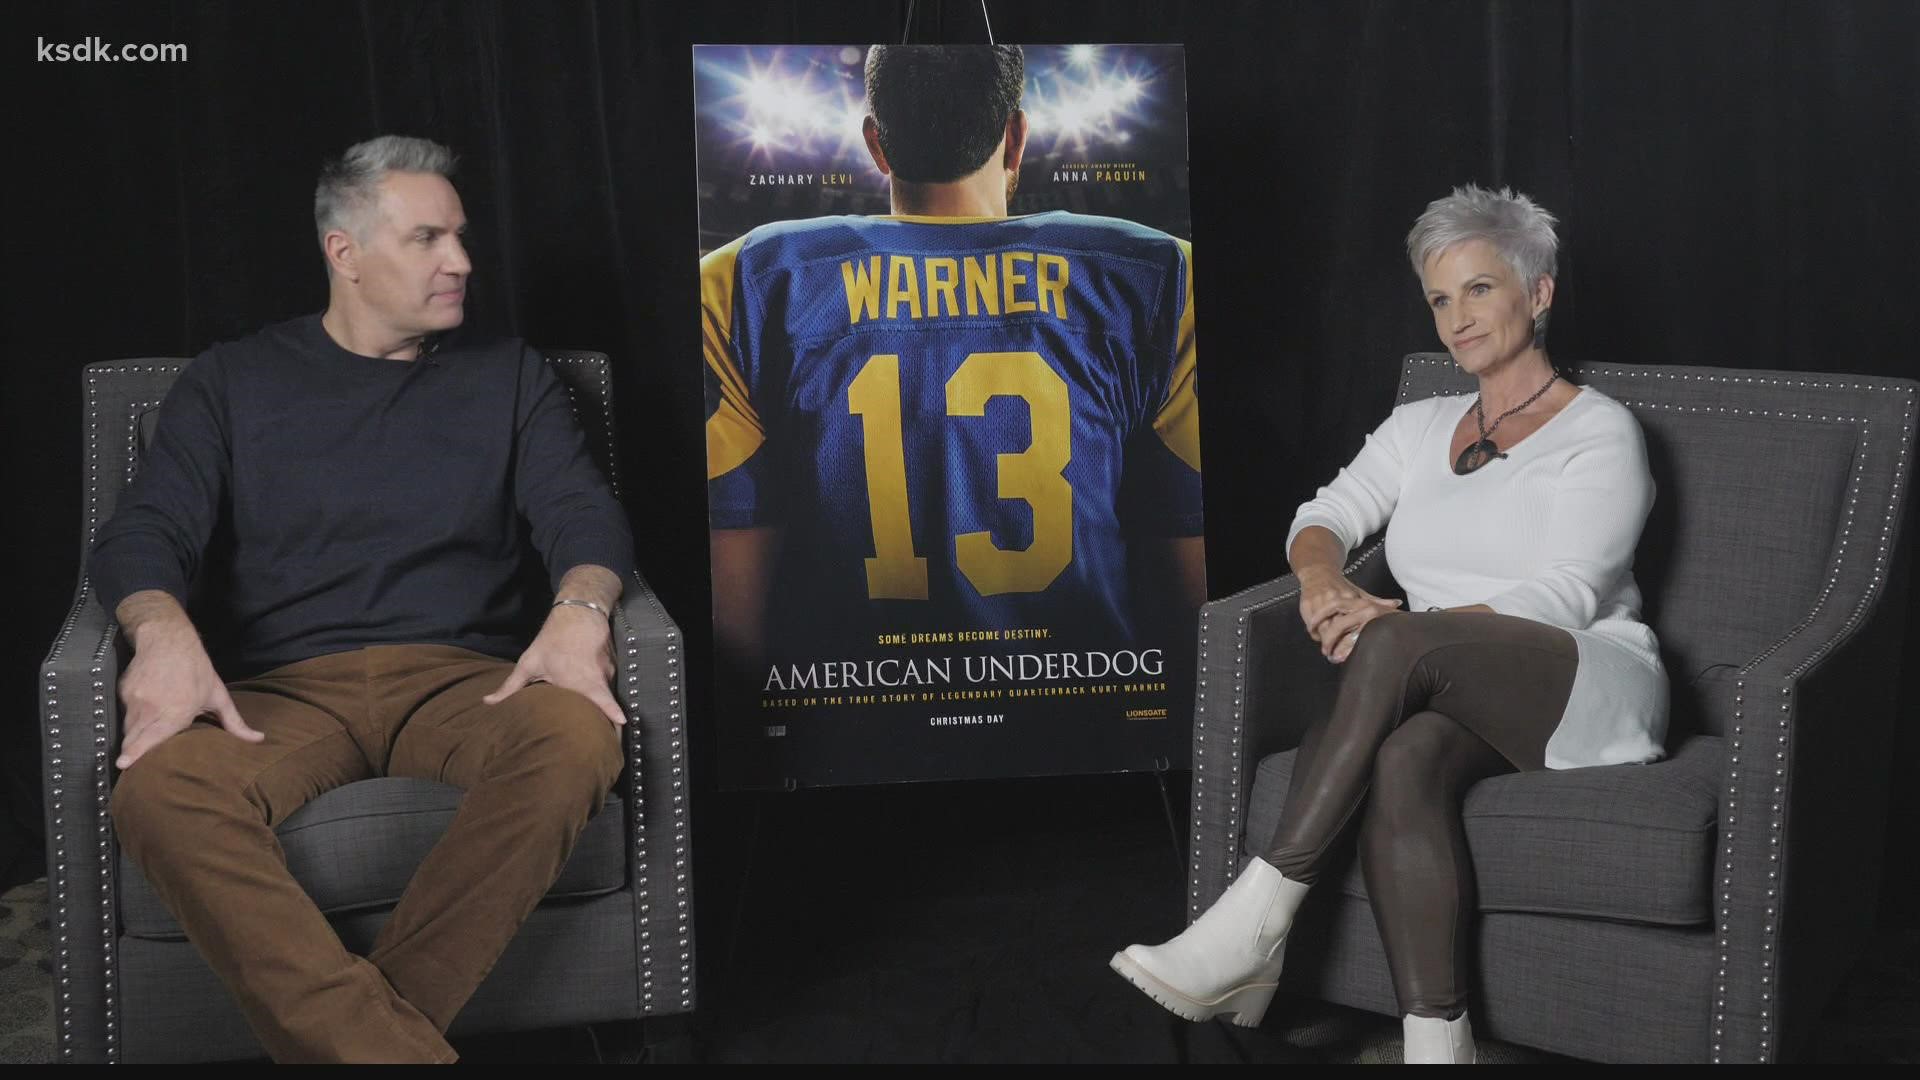 Frank sat down with the Warners ahead of the premiere of "American Underdog: The Kurt Warner Story"